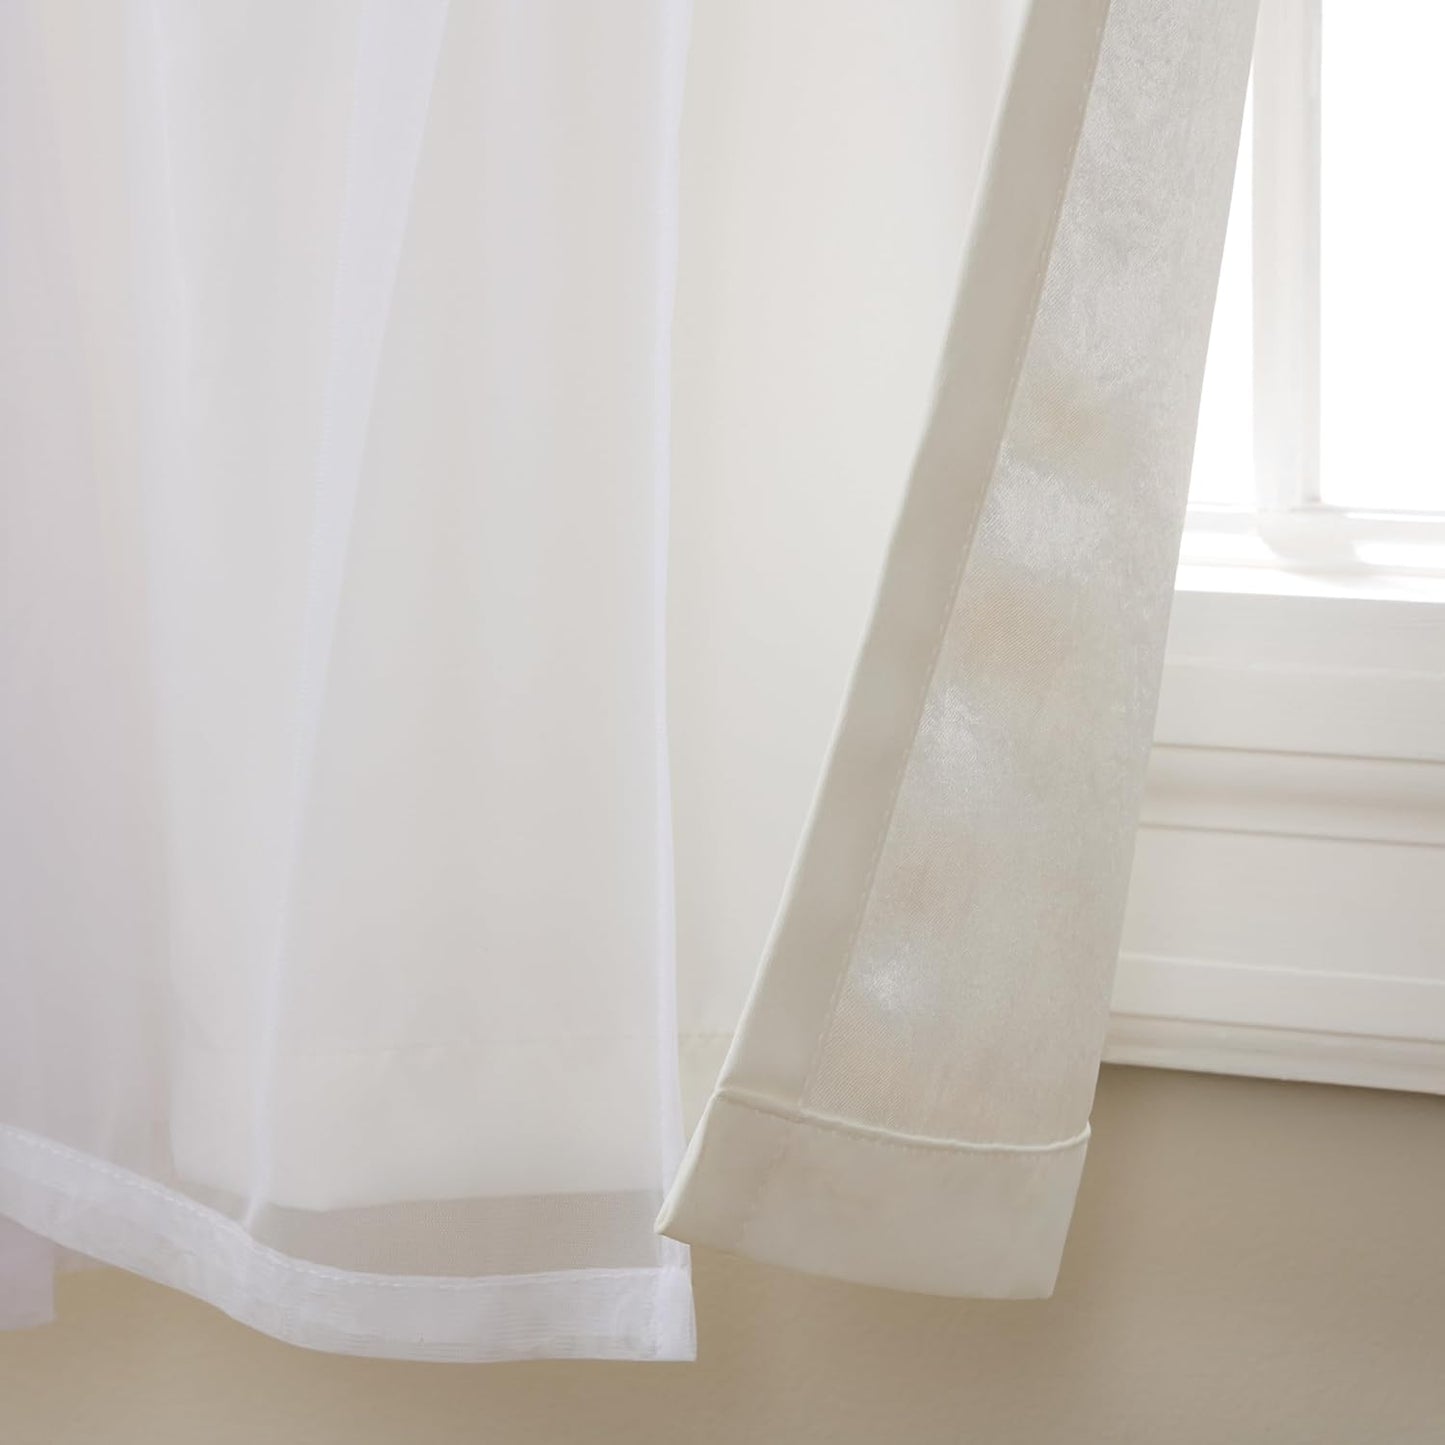 EH8256-09 2-84G Catarina Layered Solid Blackout and Sheer Window Curtain Panel Pair with Grommet Top, 52X84, Winter White, 2 Piece  Exclusive Home Curtains   